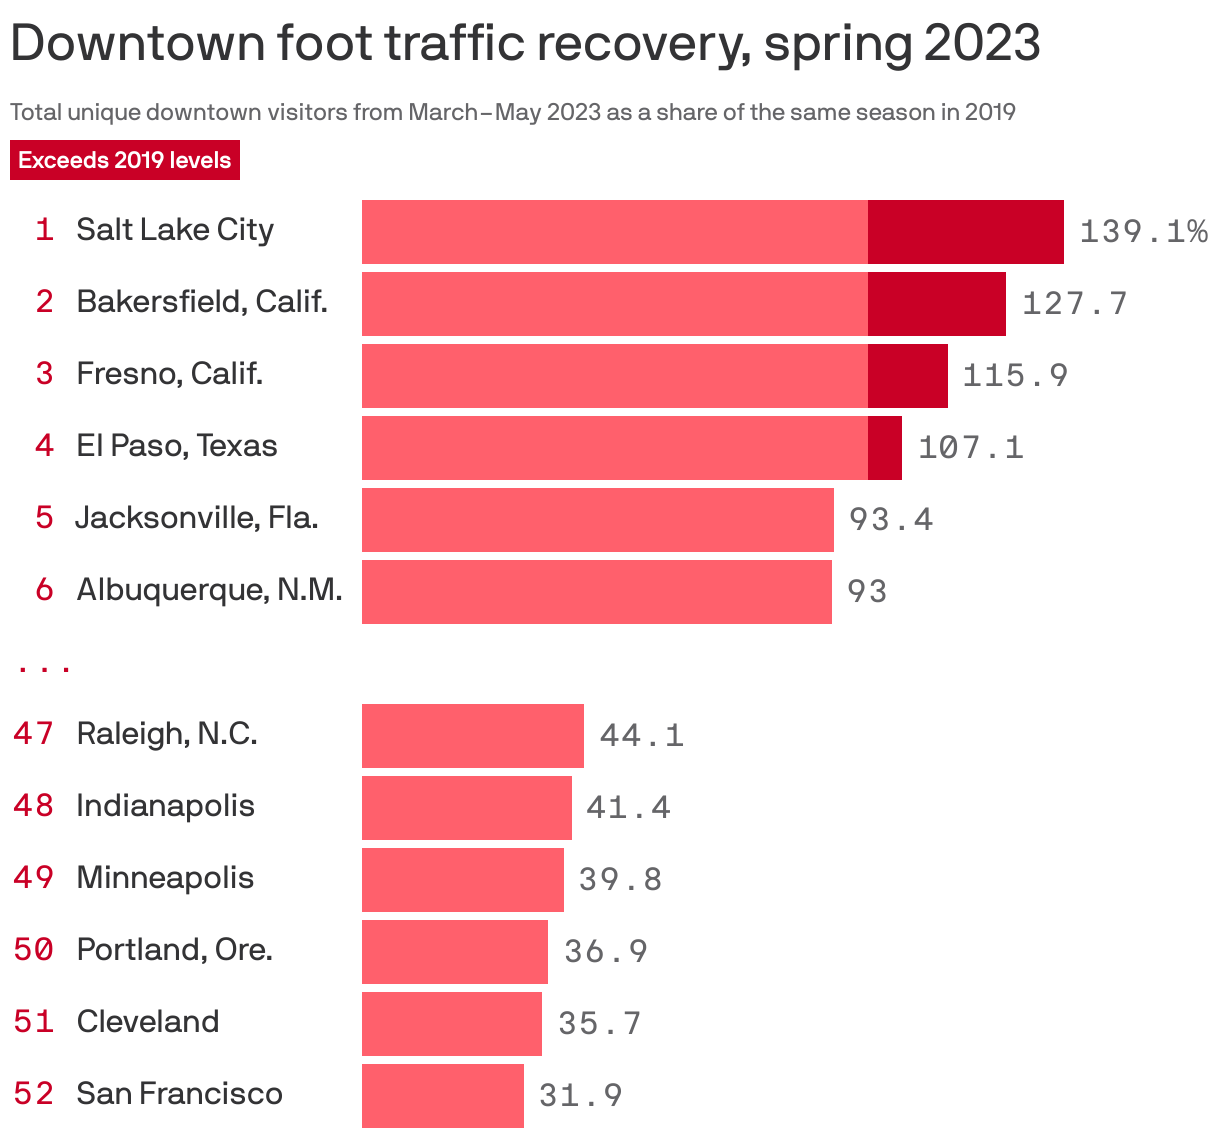 Downtown foot traffic recovery, spring 2023